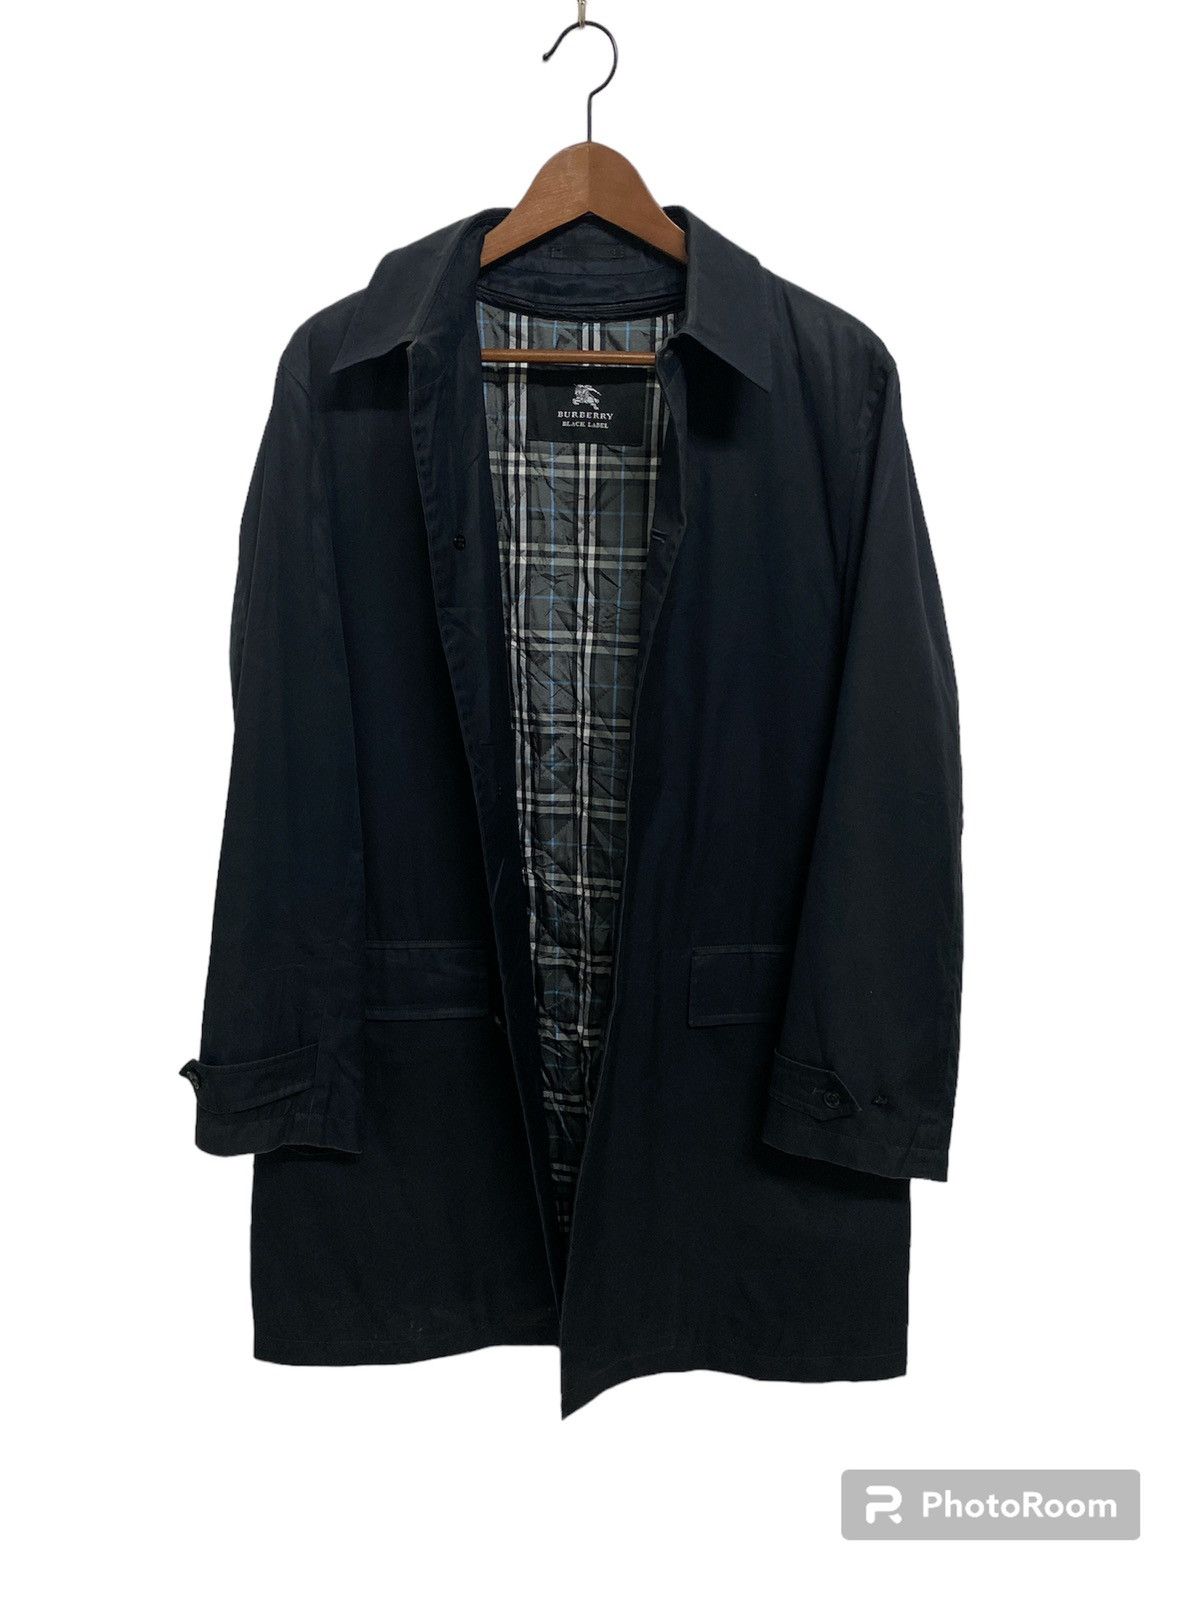 Burberry Black Label Single Breasted Trench Coat Jacket - 1